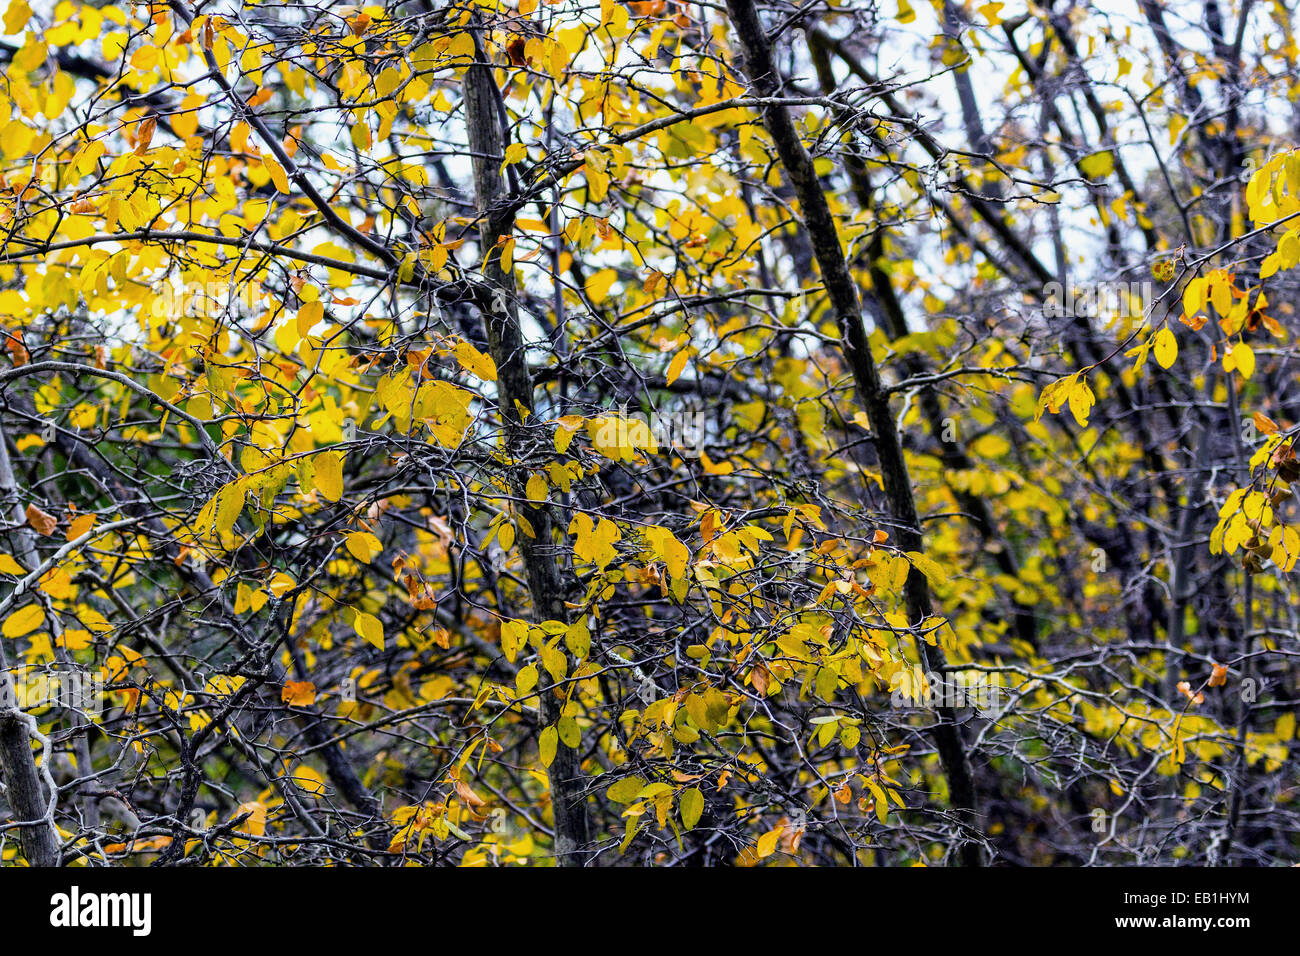 Autumn View of the Krizevac (Cross) Mountain in Medjugorje in Bosnia ed Erzegovina: brownish trees, green weeds, orange and yellow leaves Stock Photo